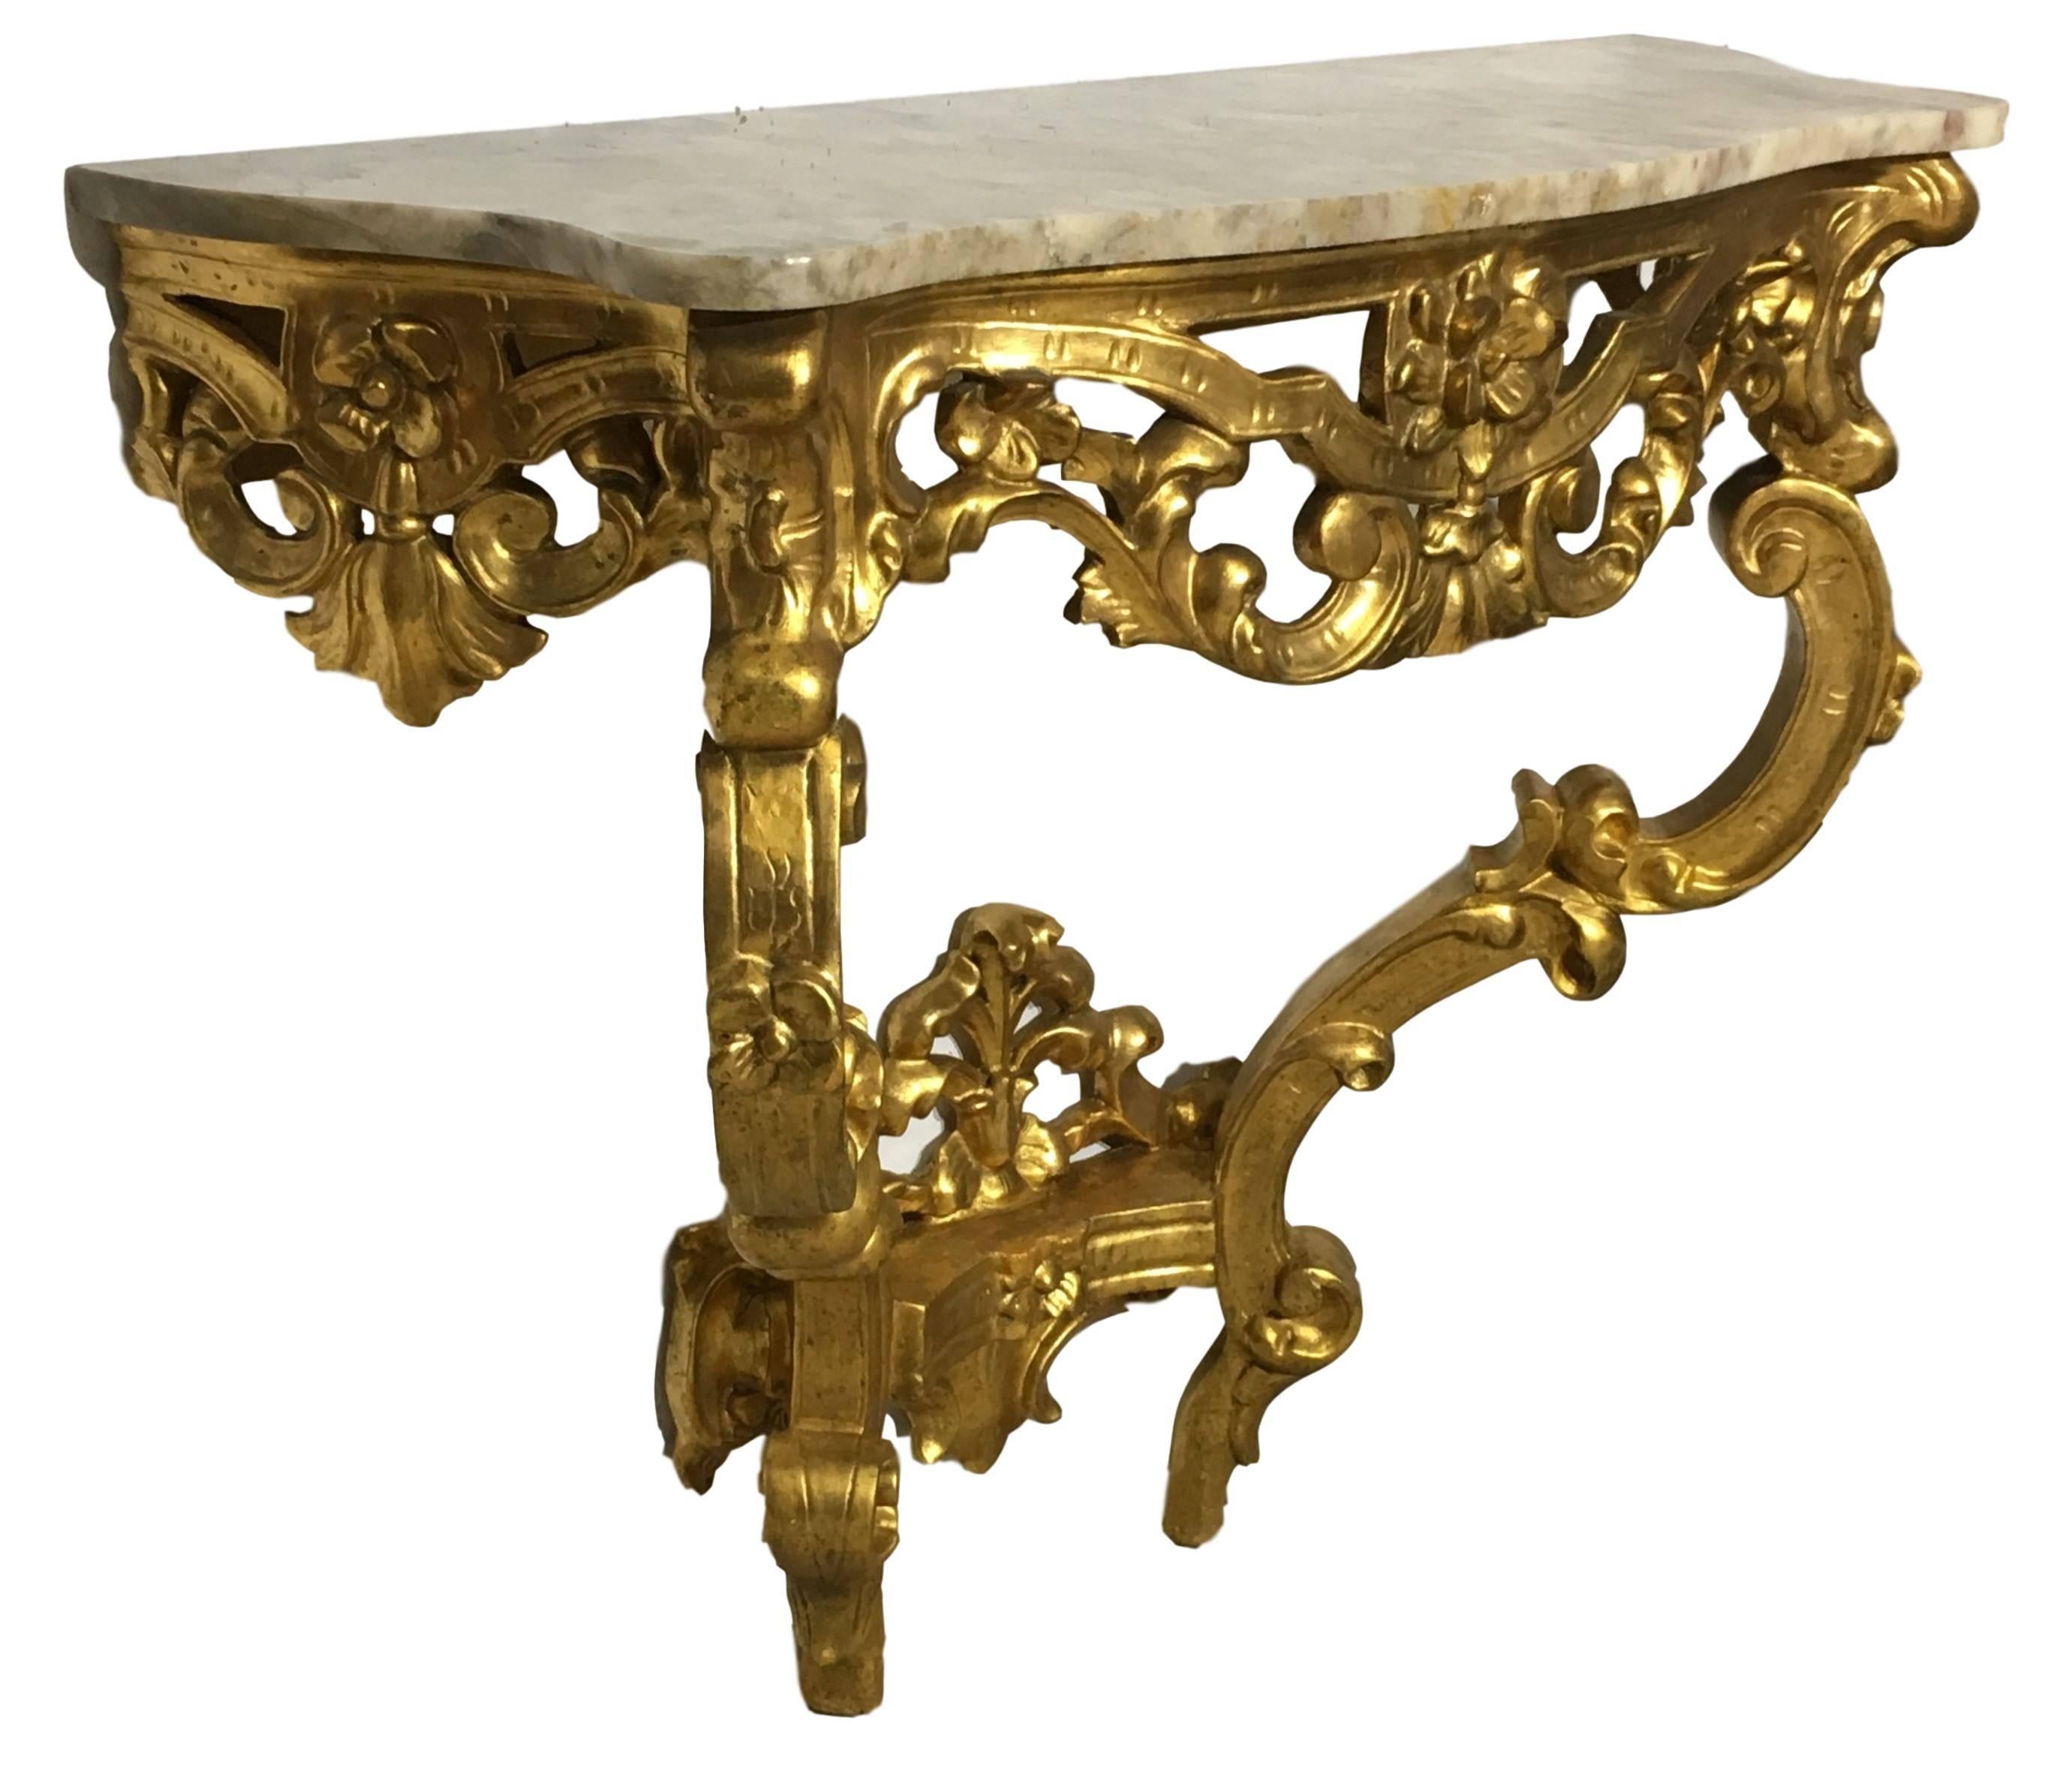 Regency 19th Century Italian Carved Giltwood Marble Top Console